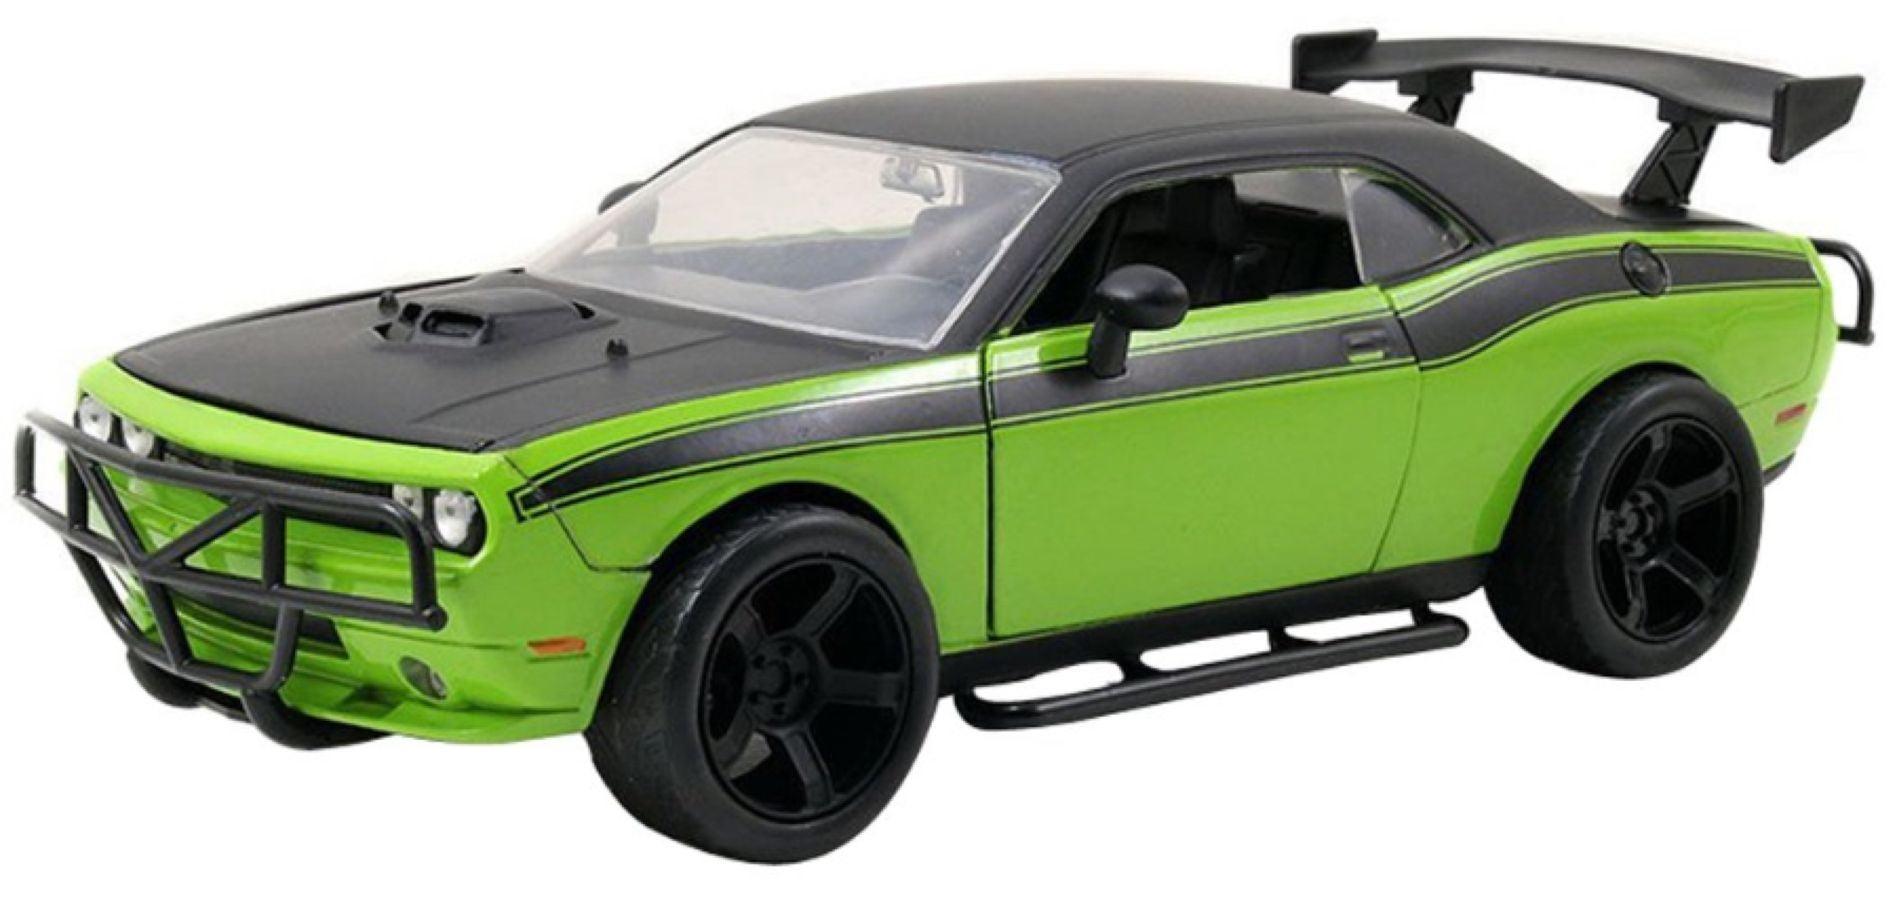 JAD97131 Fast and Furious - Dodge Challenger SRT8-Off Road 1:24 Scale Hollywood Ride - Jada Toys - Titan Pop Culture